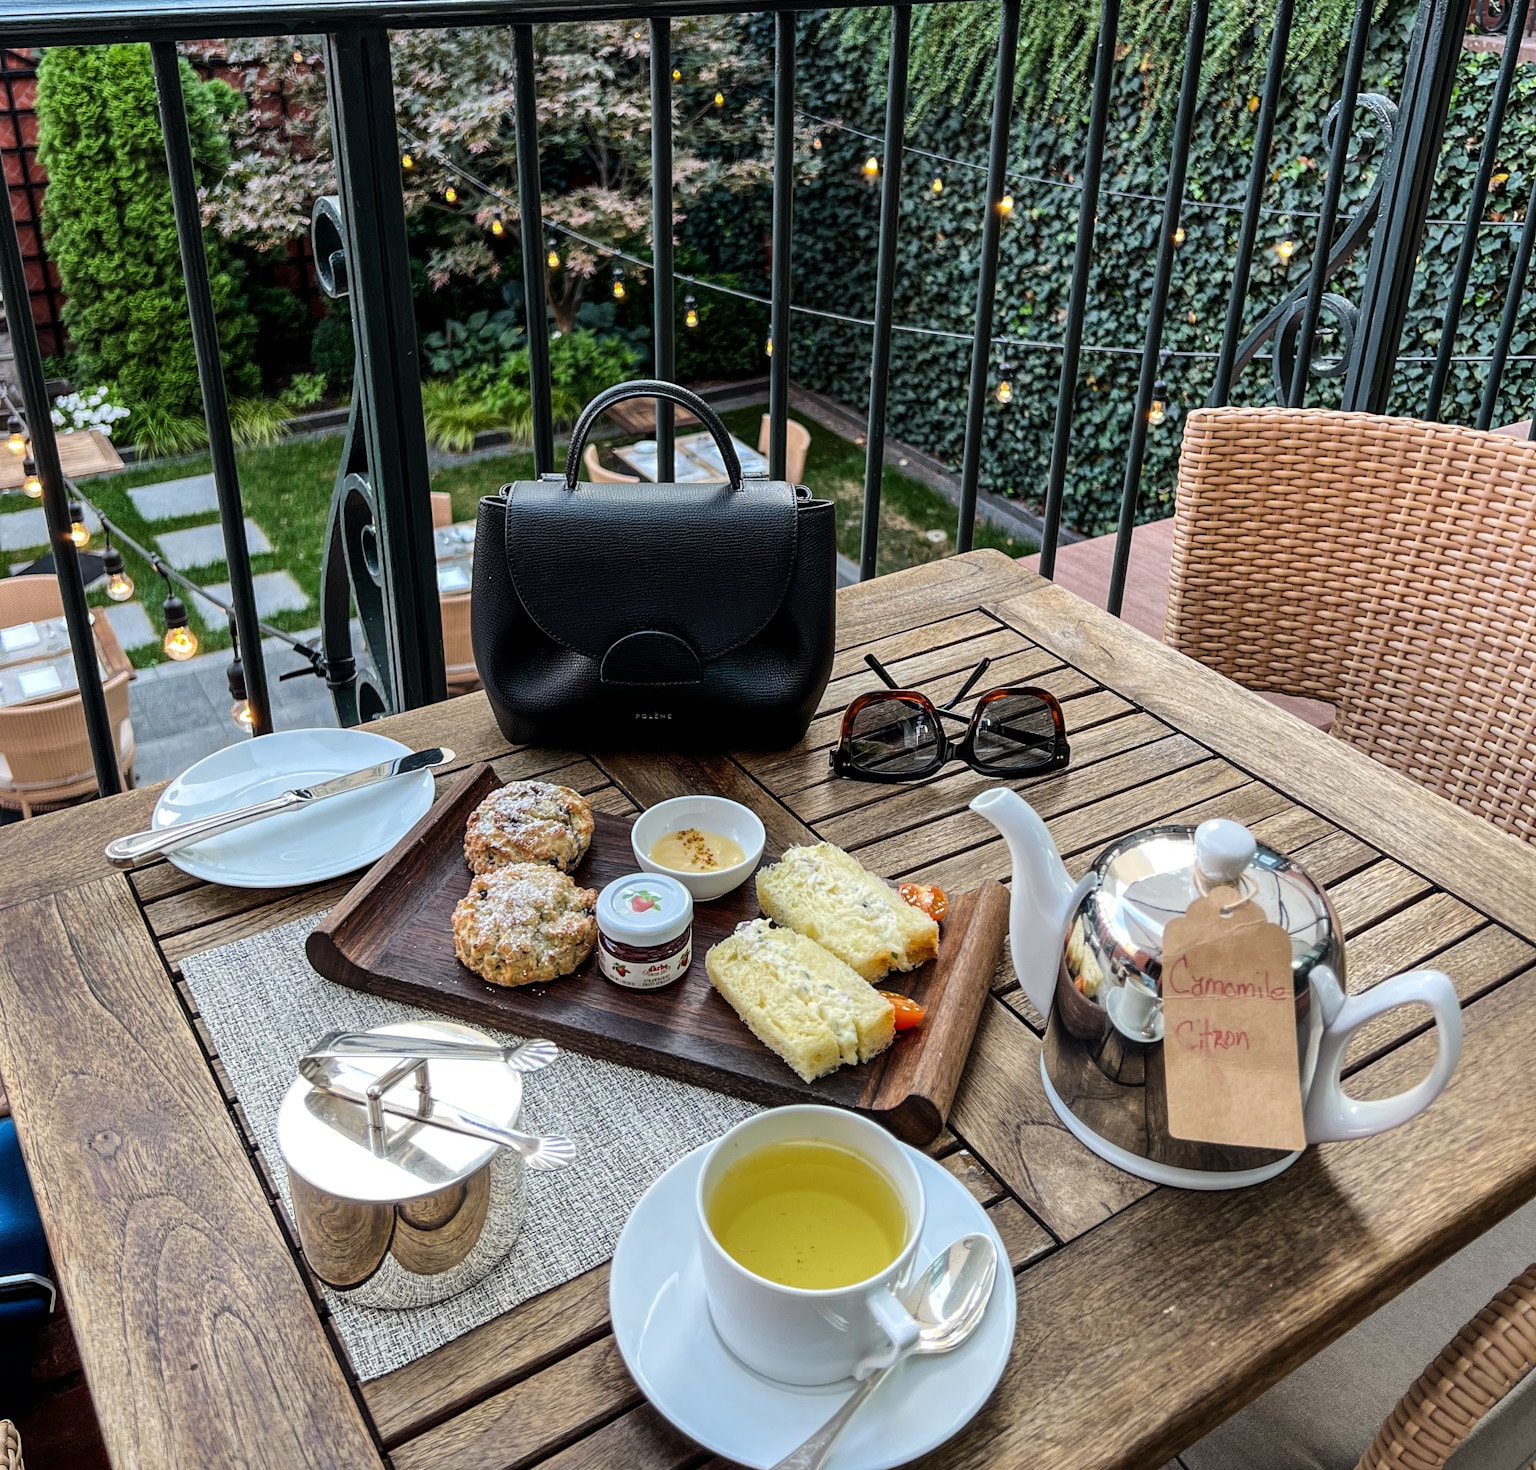 Tea set up on an outdoor terrace at The Ivy Hotel.